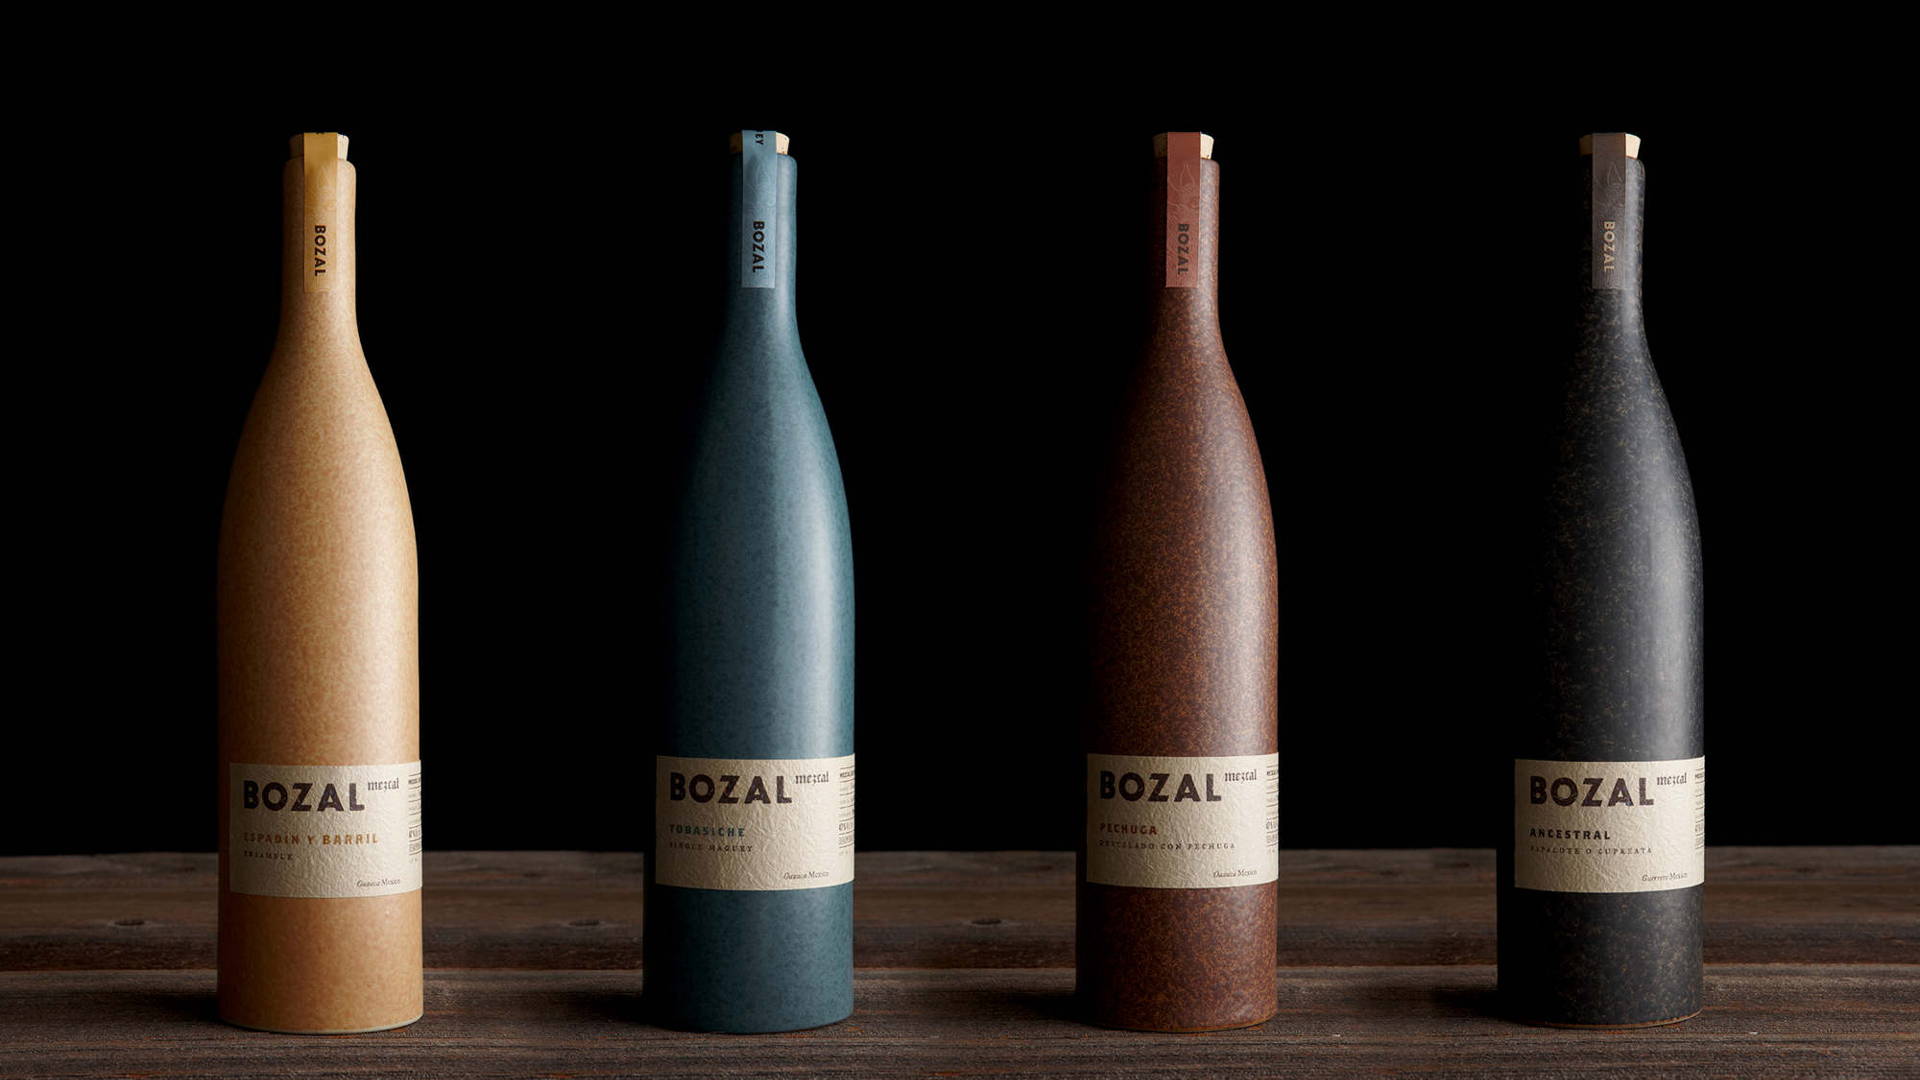 Featured image for This Mezcal Comes In a Traditional-Looking Ceramic Bottle